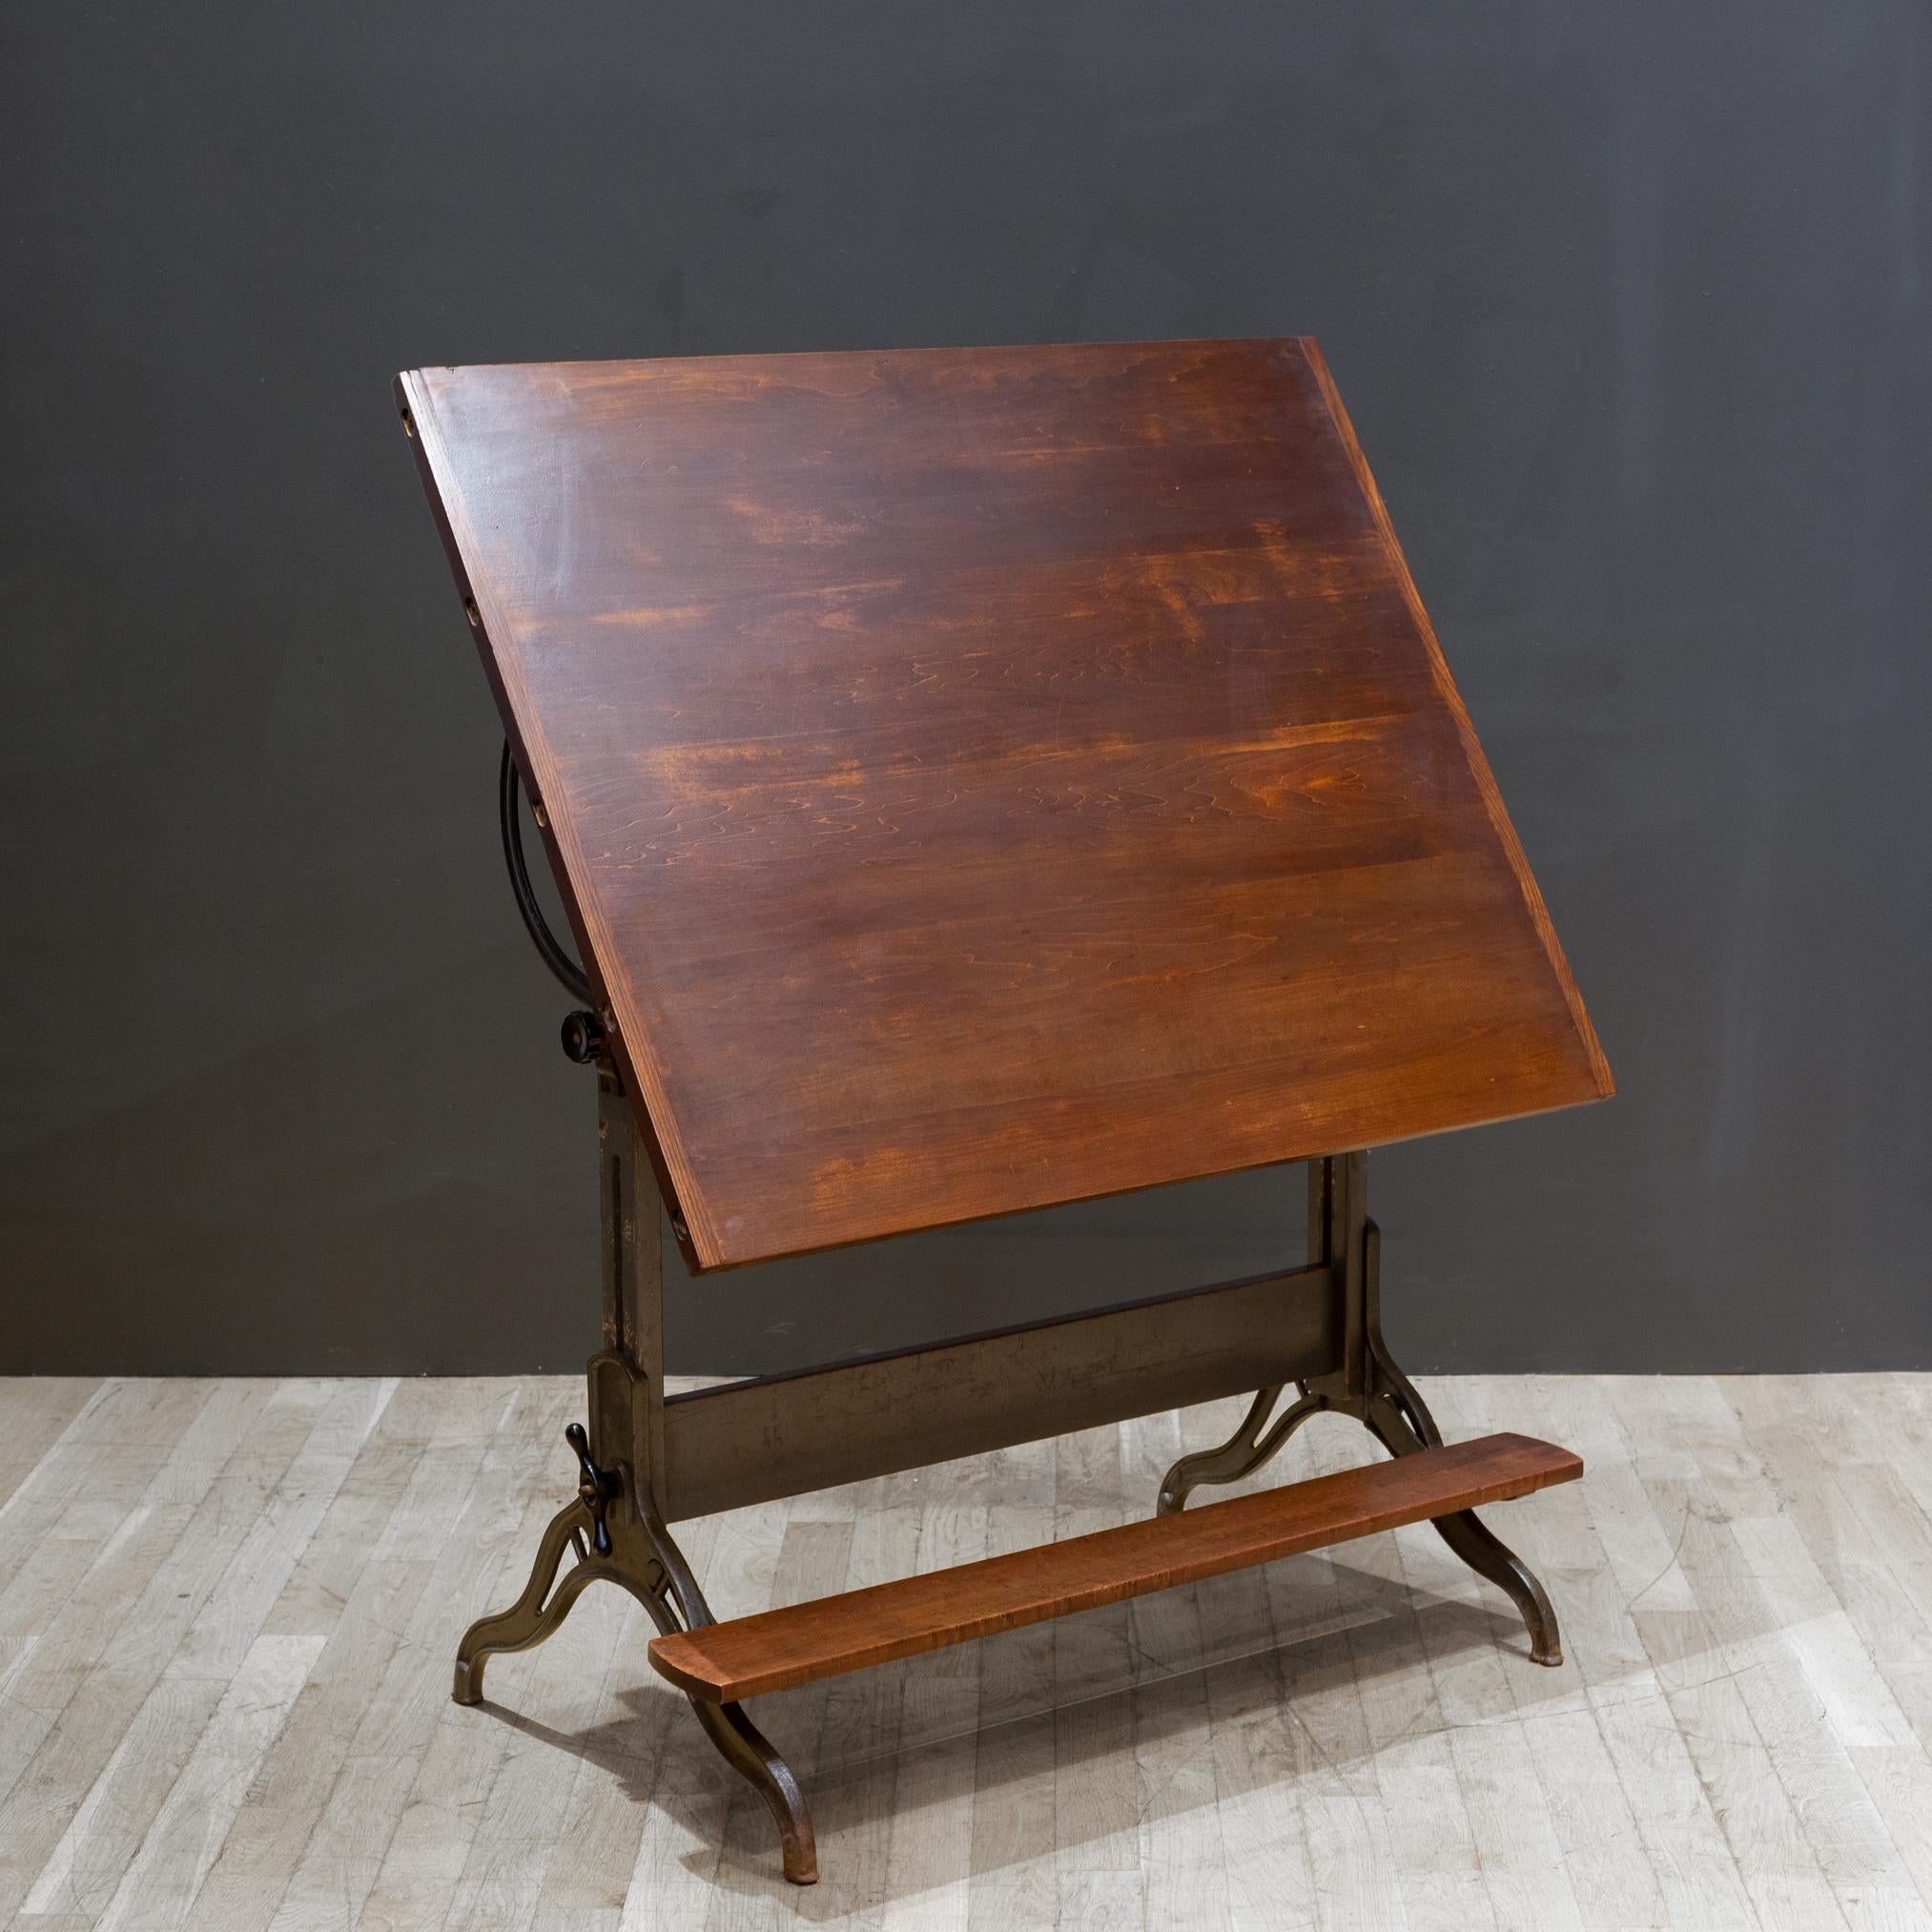 American Antique Hamilton Mfg. Co. Drafting Table with Footrest c.1930 For Sale